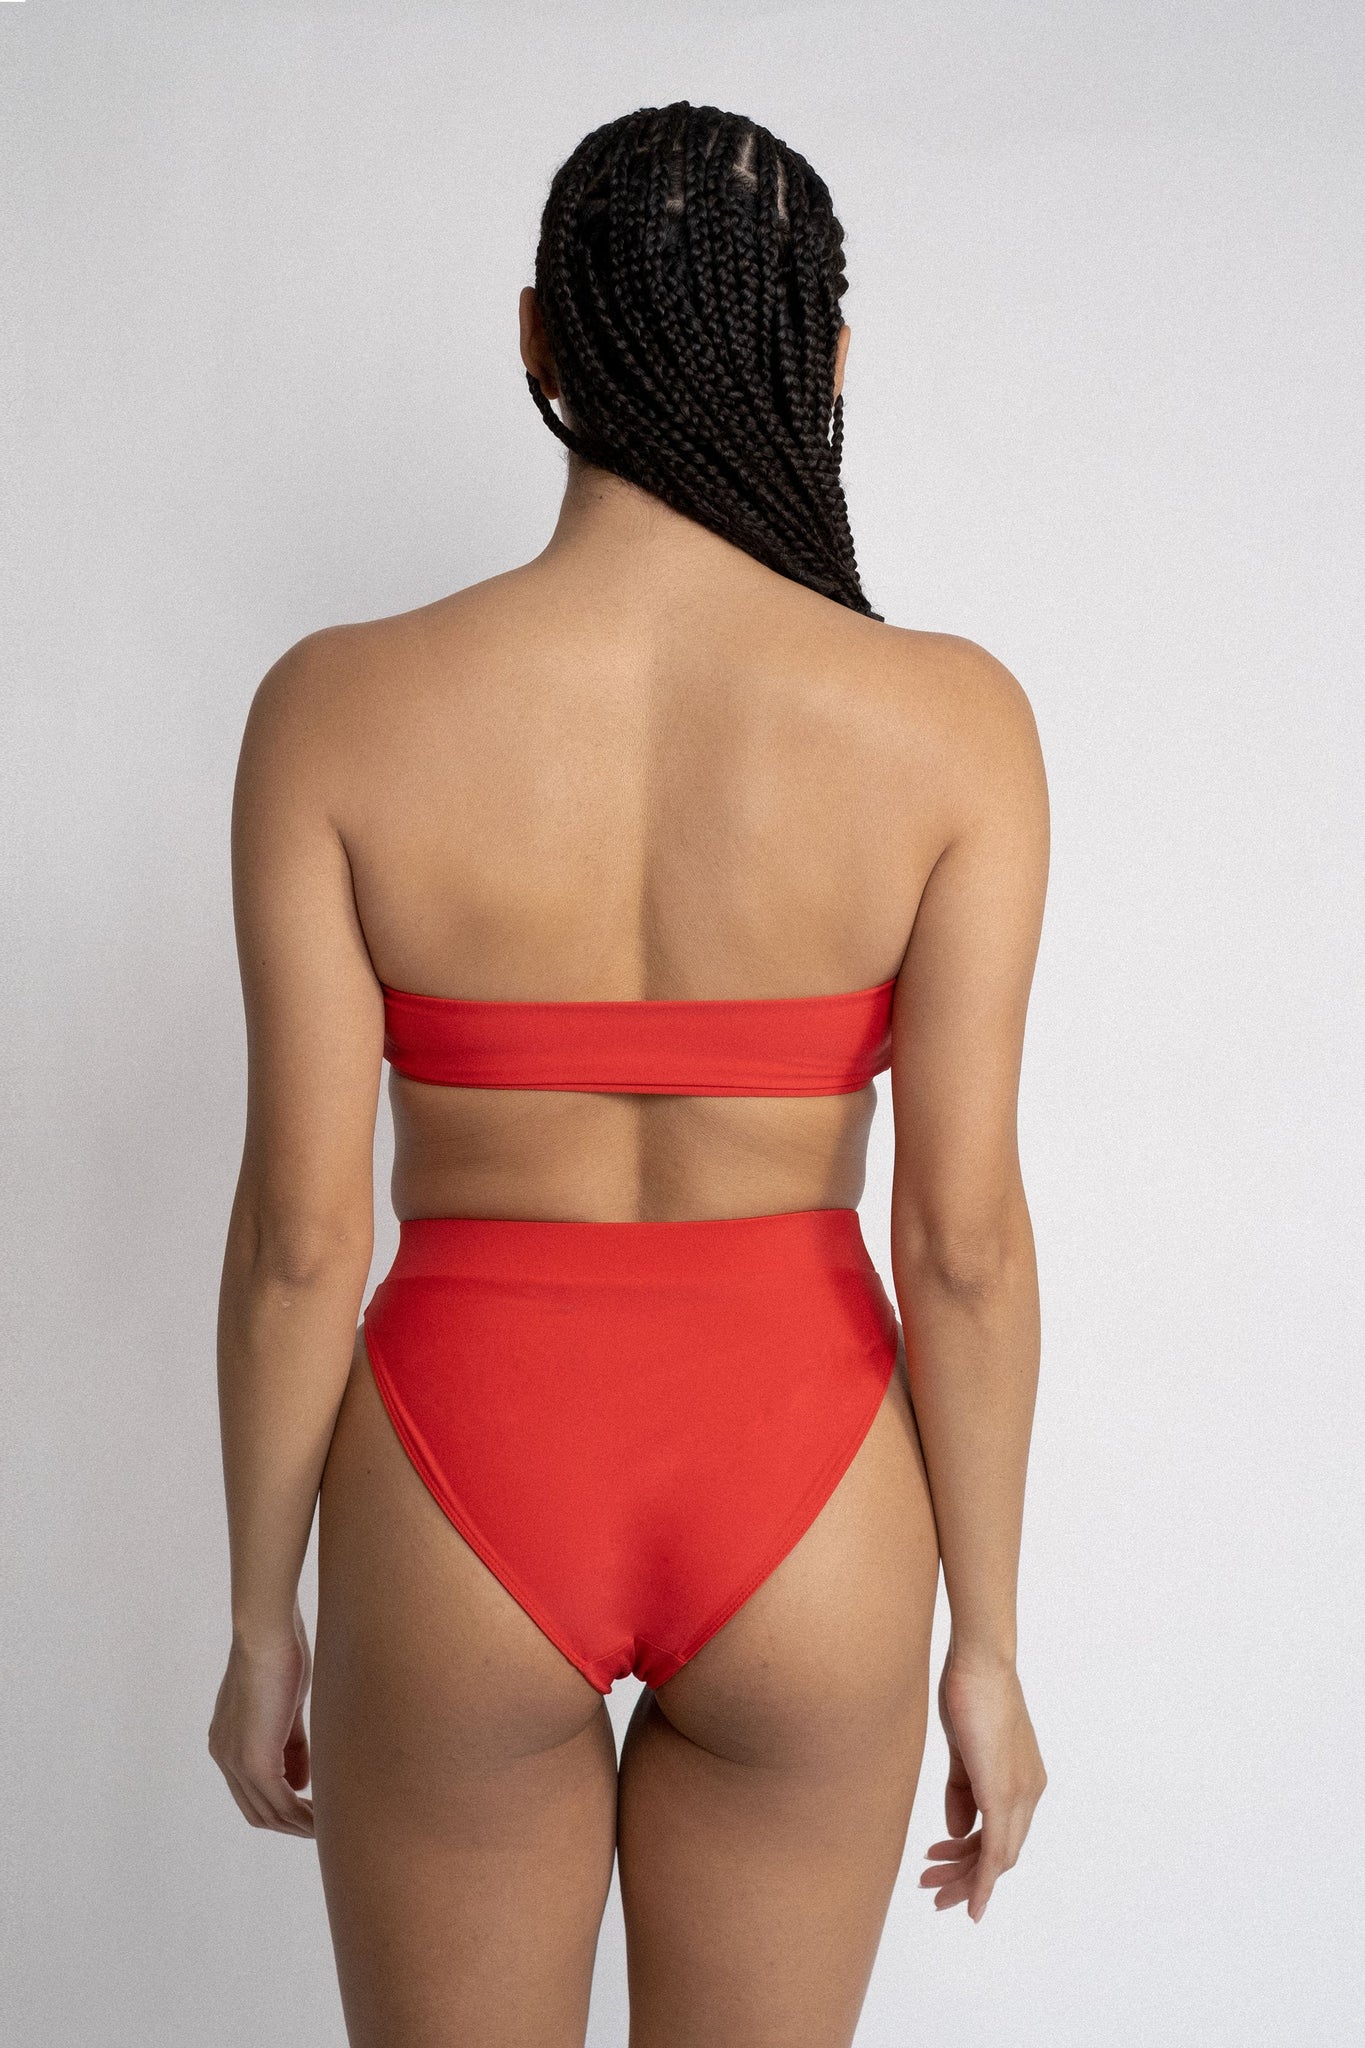 The back of a woman with her arms by her side wearing bright red high waisted bikini bottoms with a matching bright red strapless bandeau bikini top.